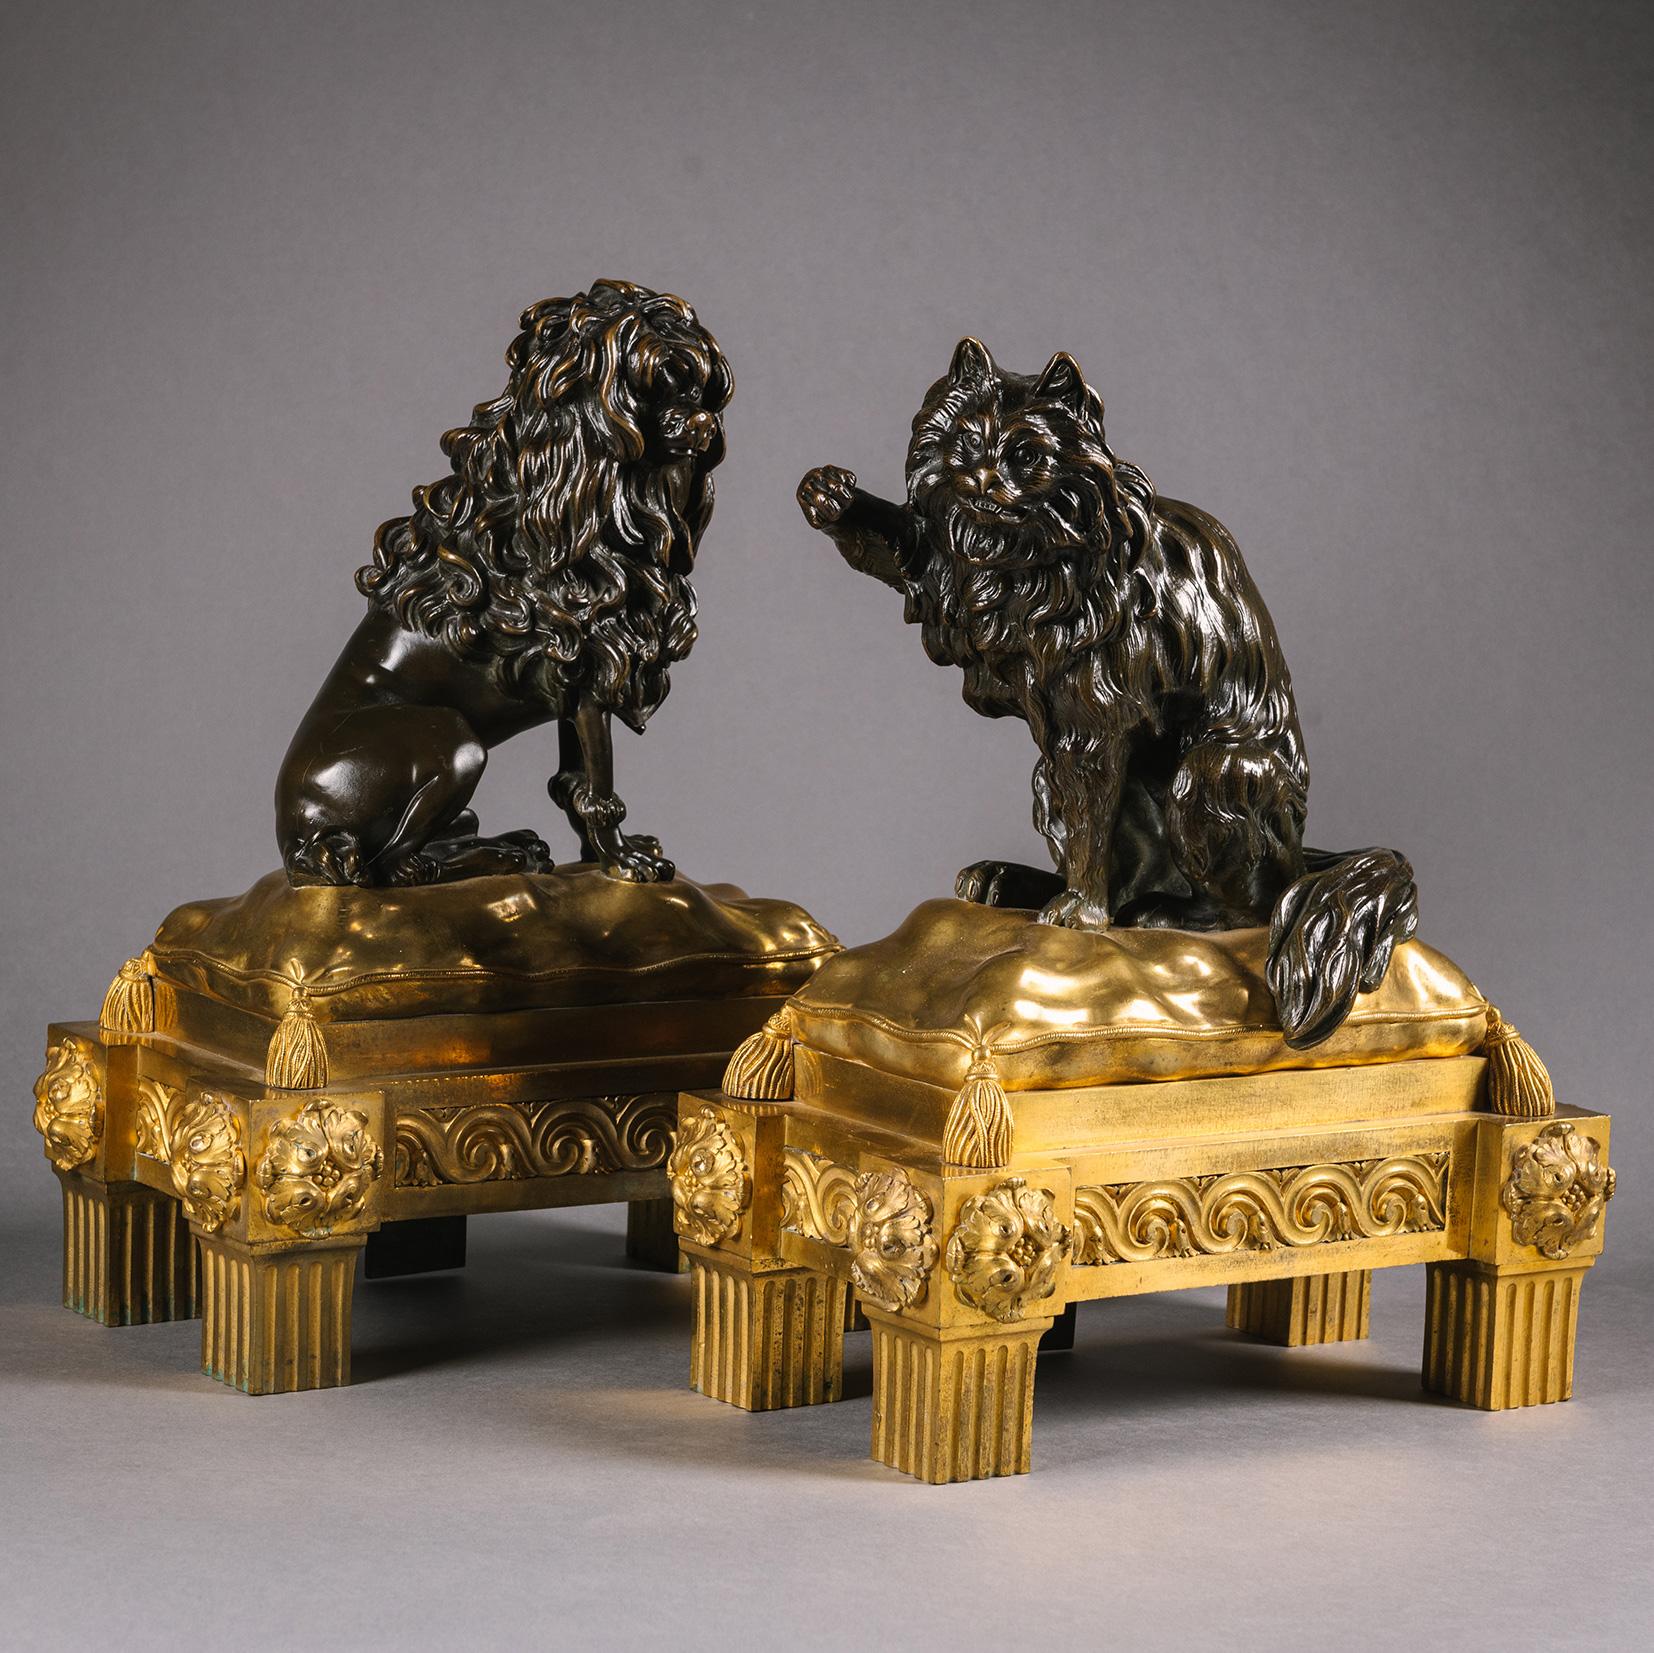 A Pair Of Late Louis XV Period Gilt And Patinated Bronze Figural Chenets, Attributed to Jacques and Philippe Caffieri.

Modelled as a dog and cat, each seated on a tasselled cushion atop a Goût grec base with entrelac panelled frieze and eared